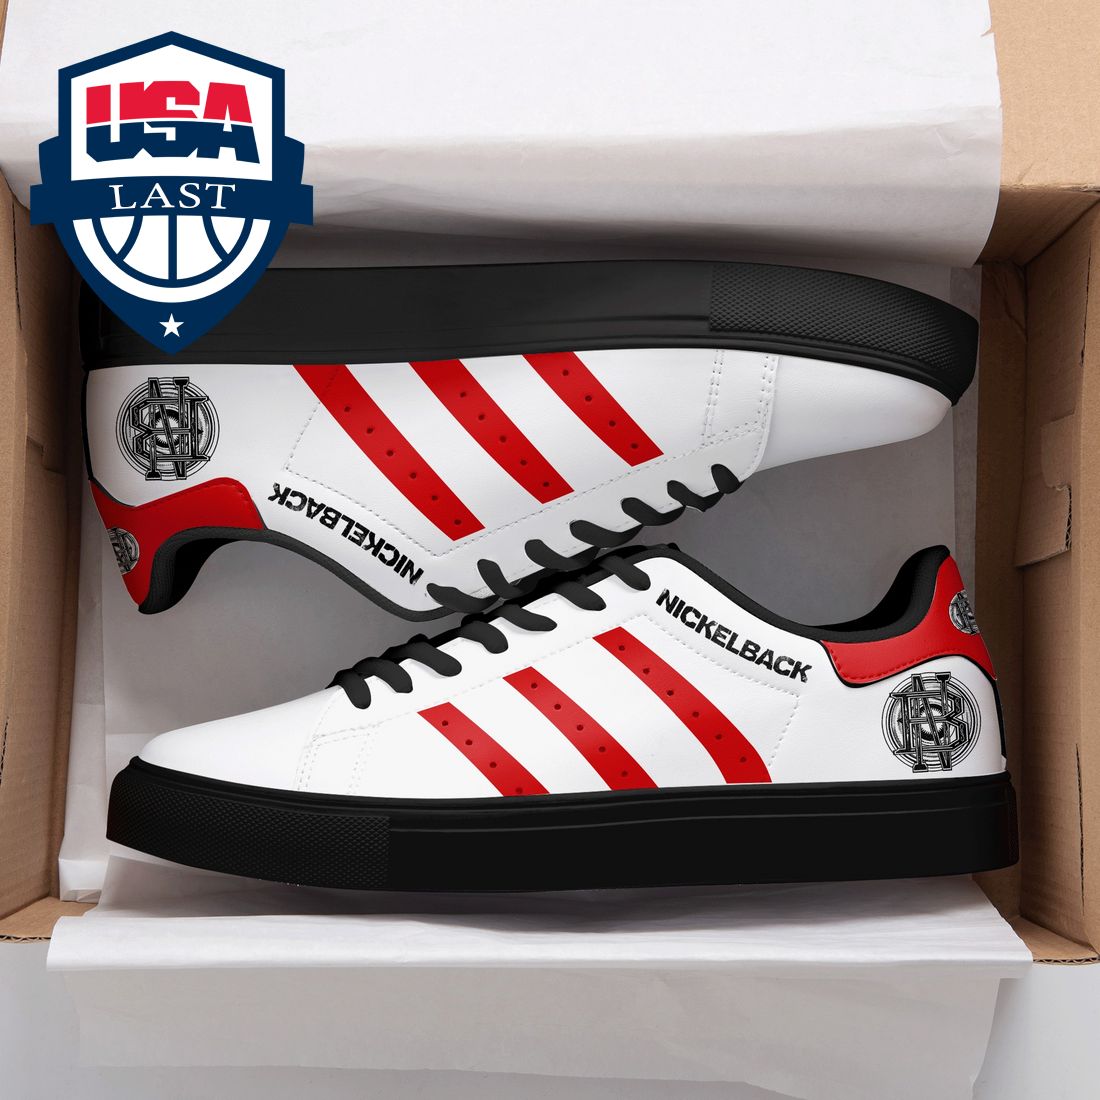 Nickelback Red Stripes Stan Smith Low Top Shoes - This is awesome and unique